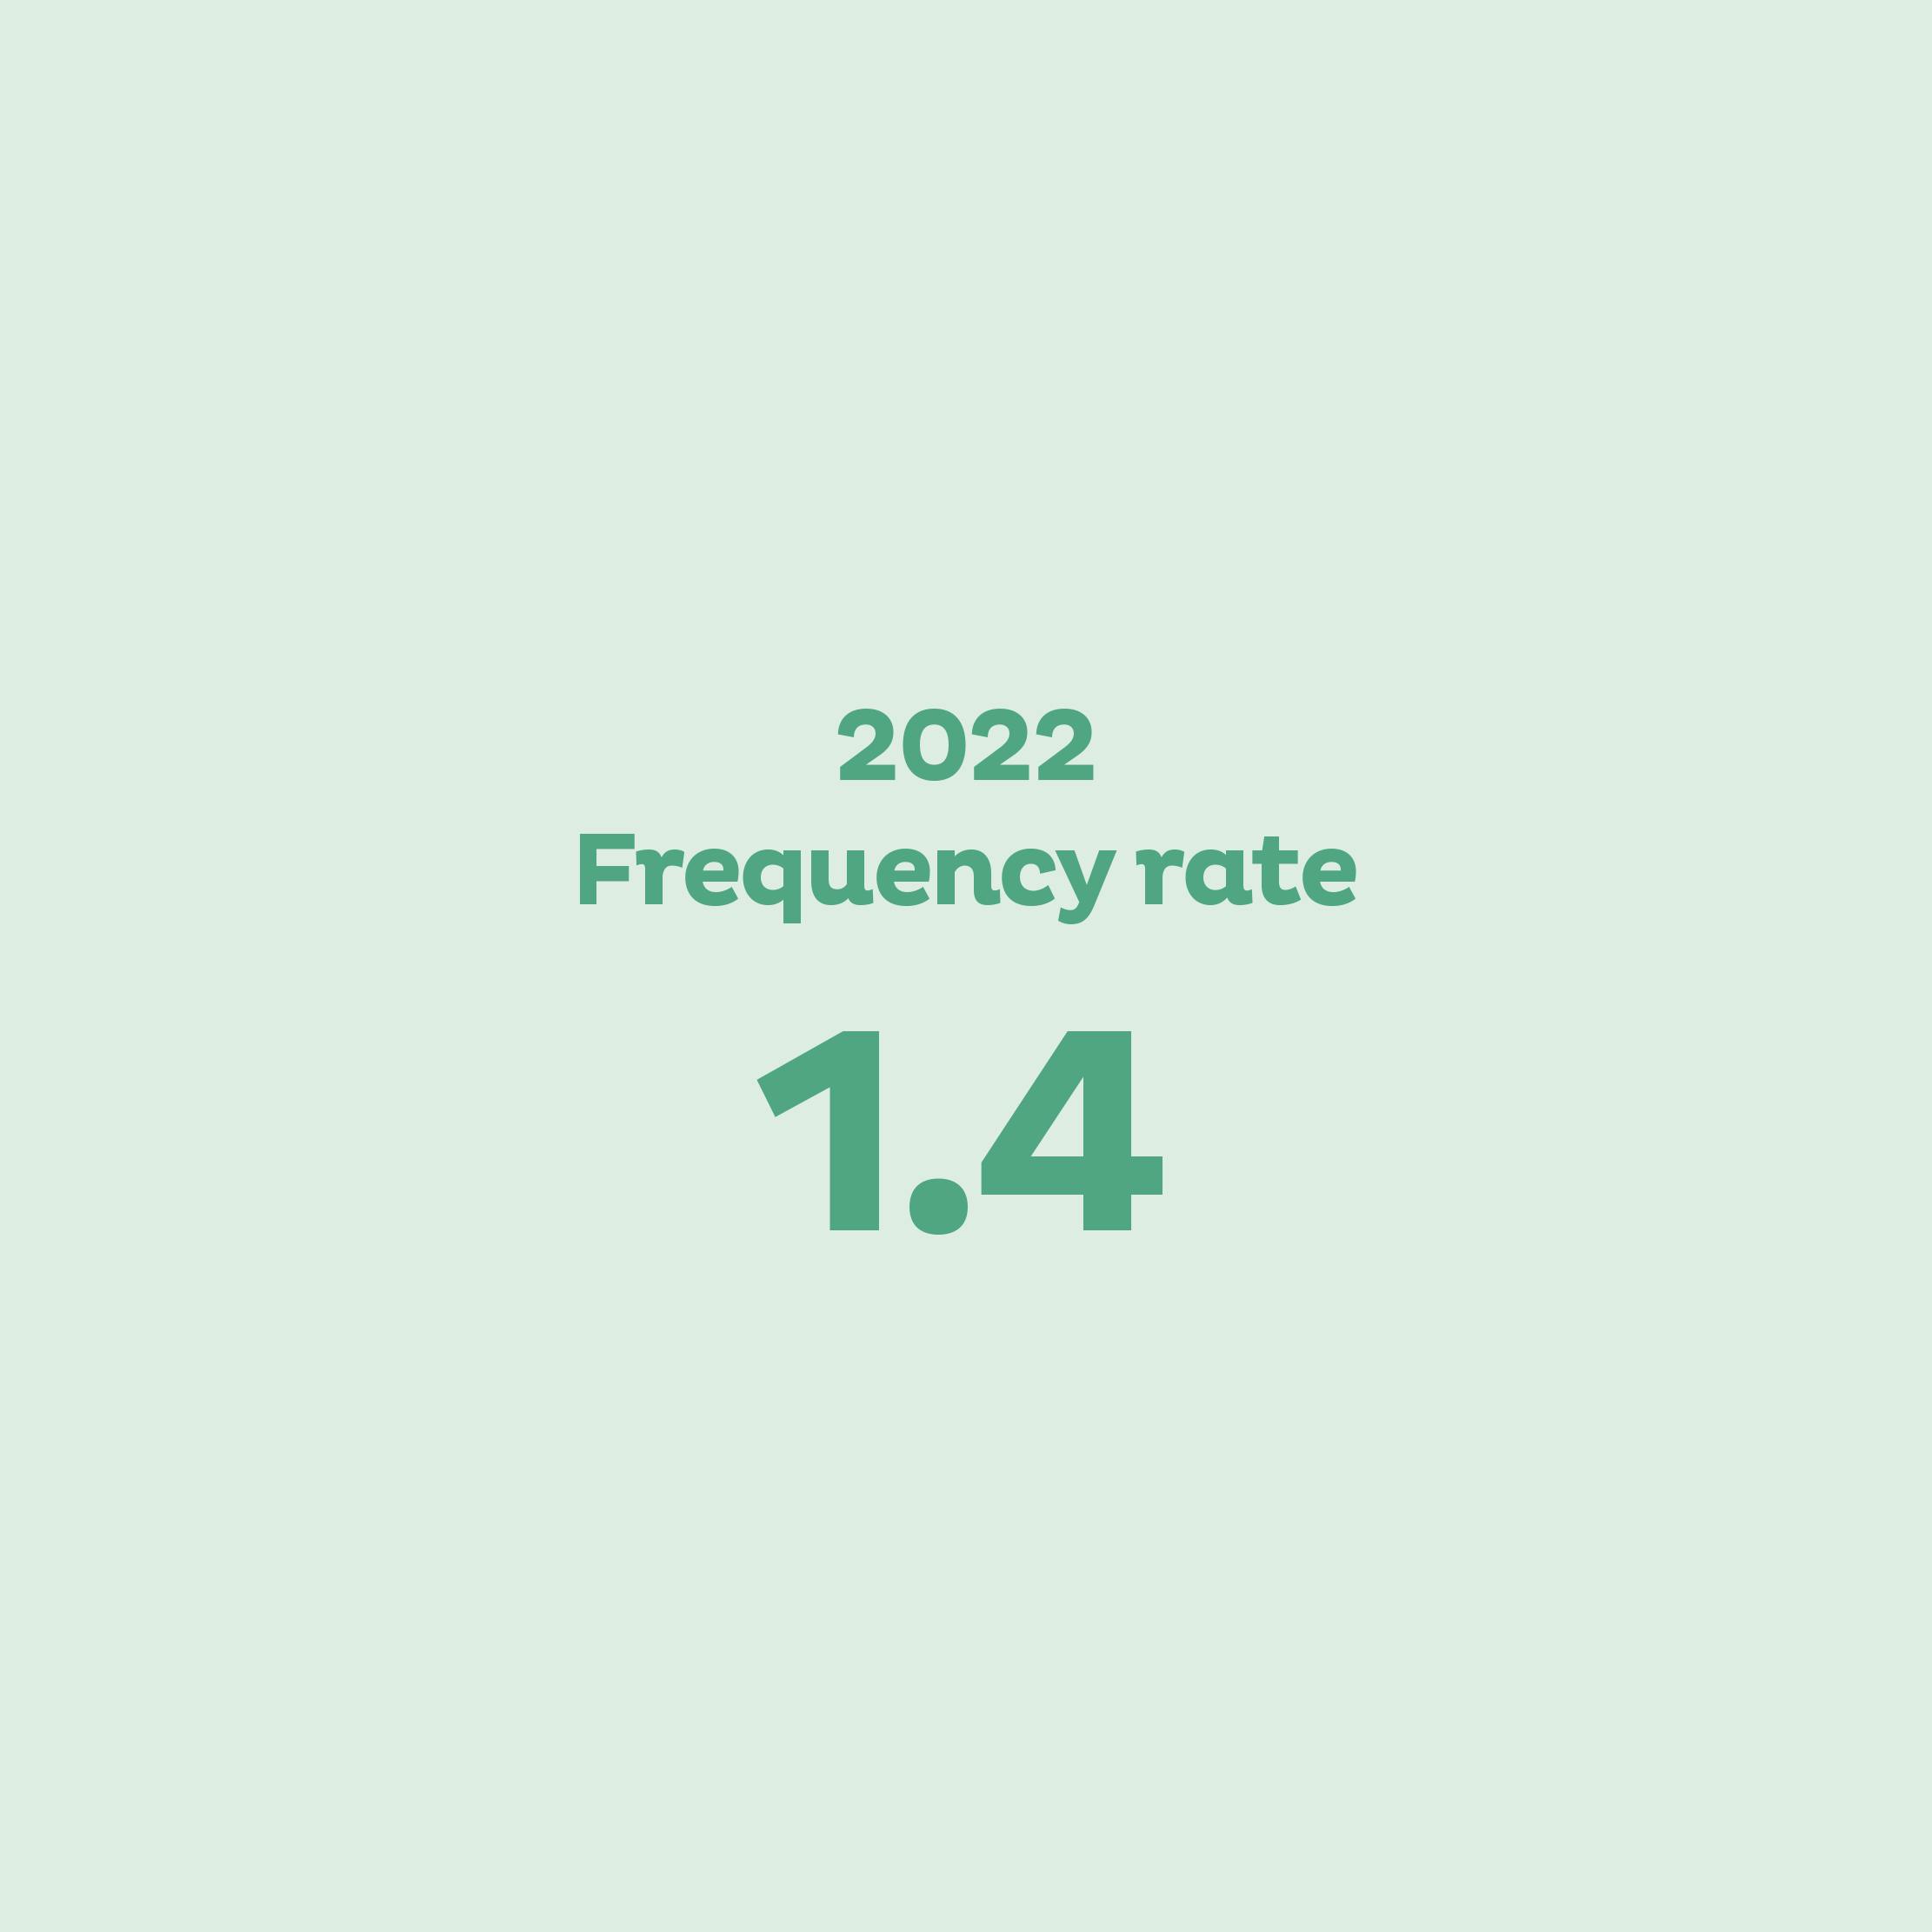 2022 Frequency rate: 1.4